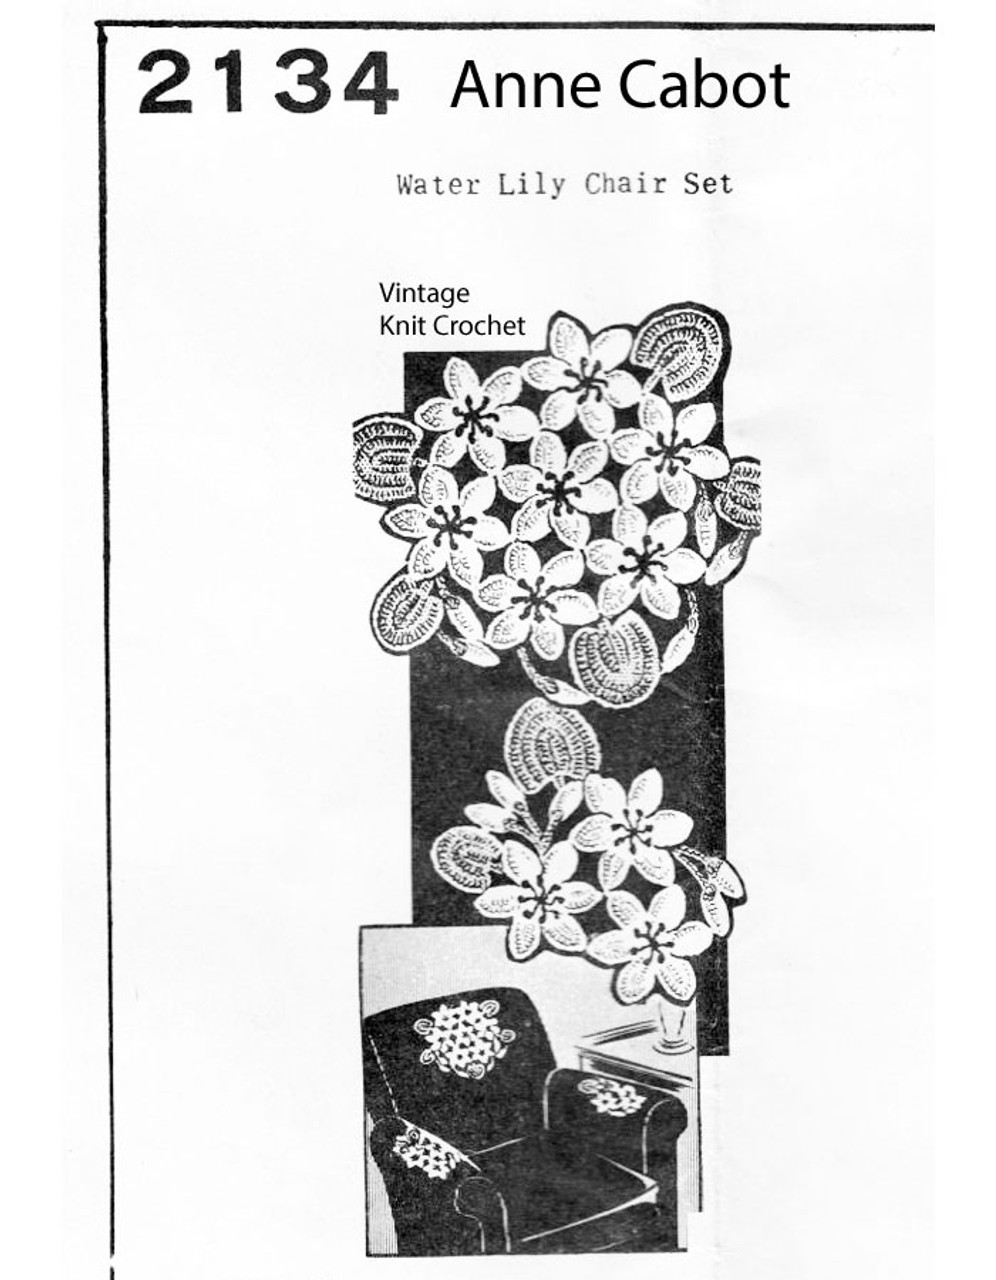 Water Lily Crochet Chair Set Pattern, Mail Order 2134